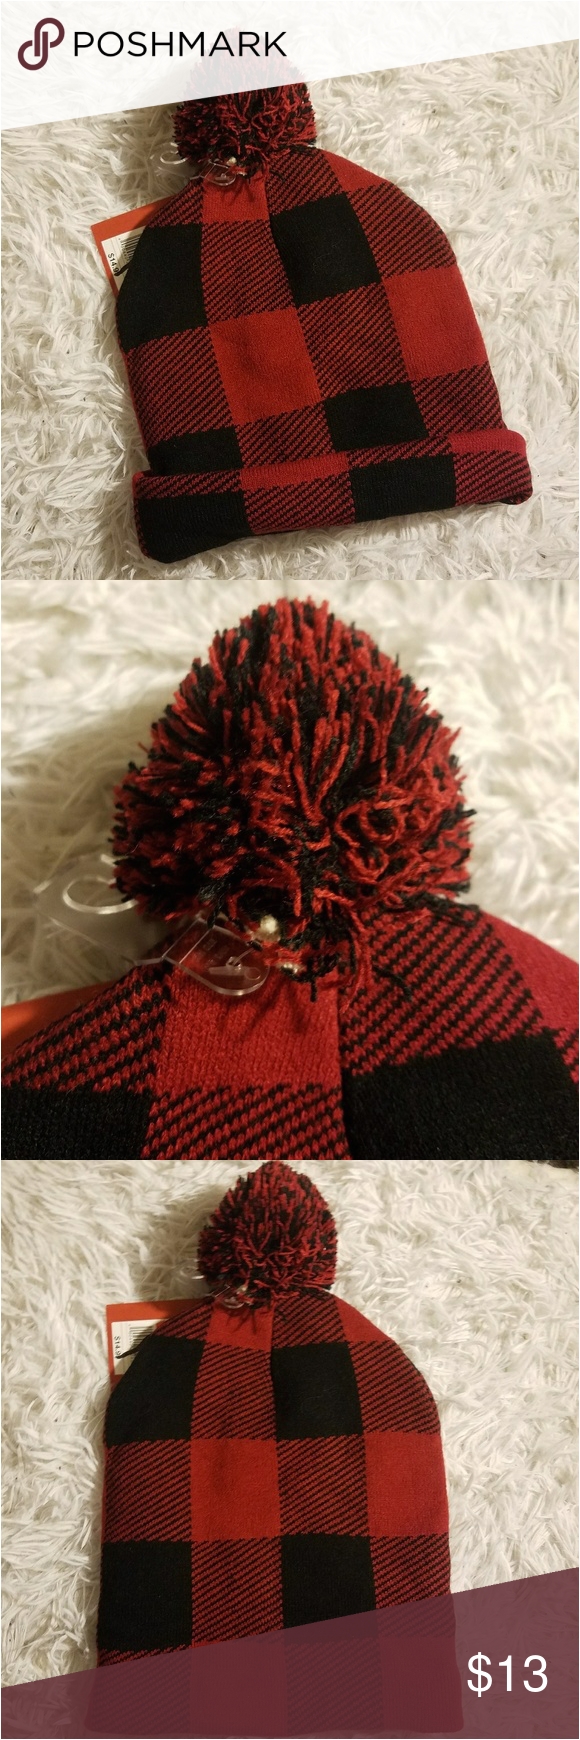 red black pom pom beanie hat gingham new new with tags target mission black and red thick quality beanie pom pom hat super cute men or women can wear it